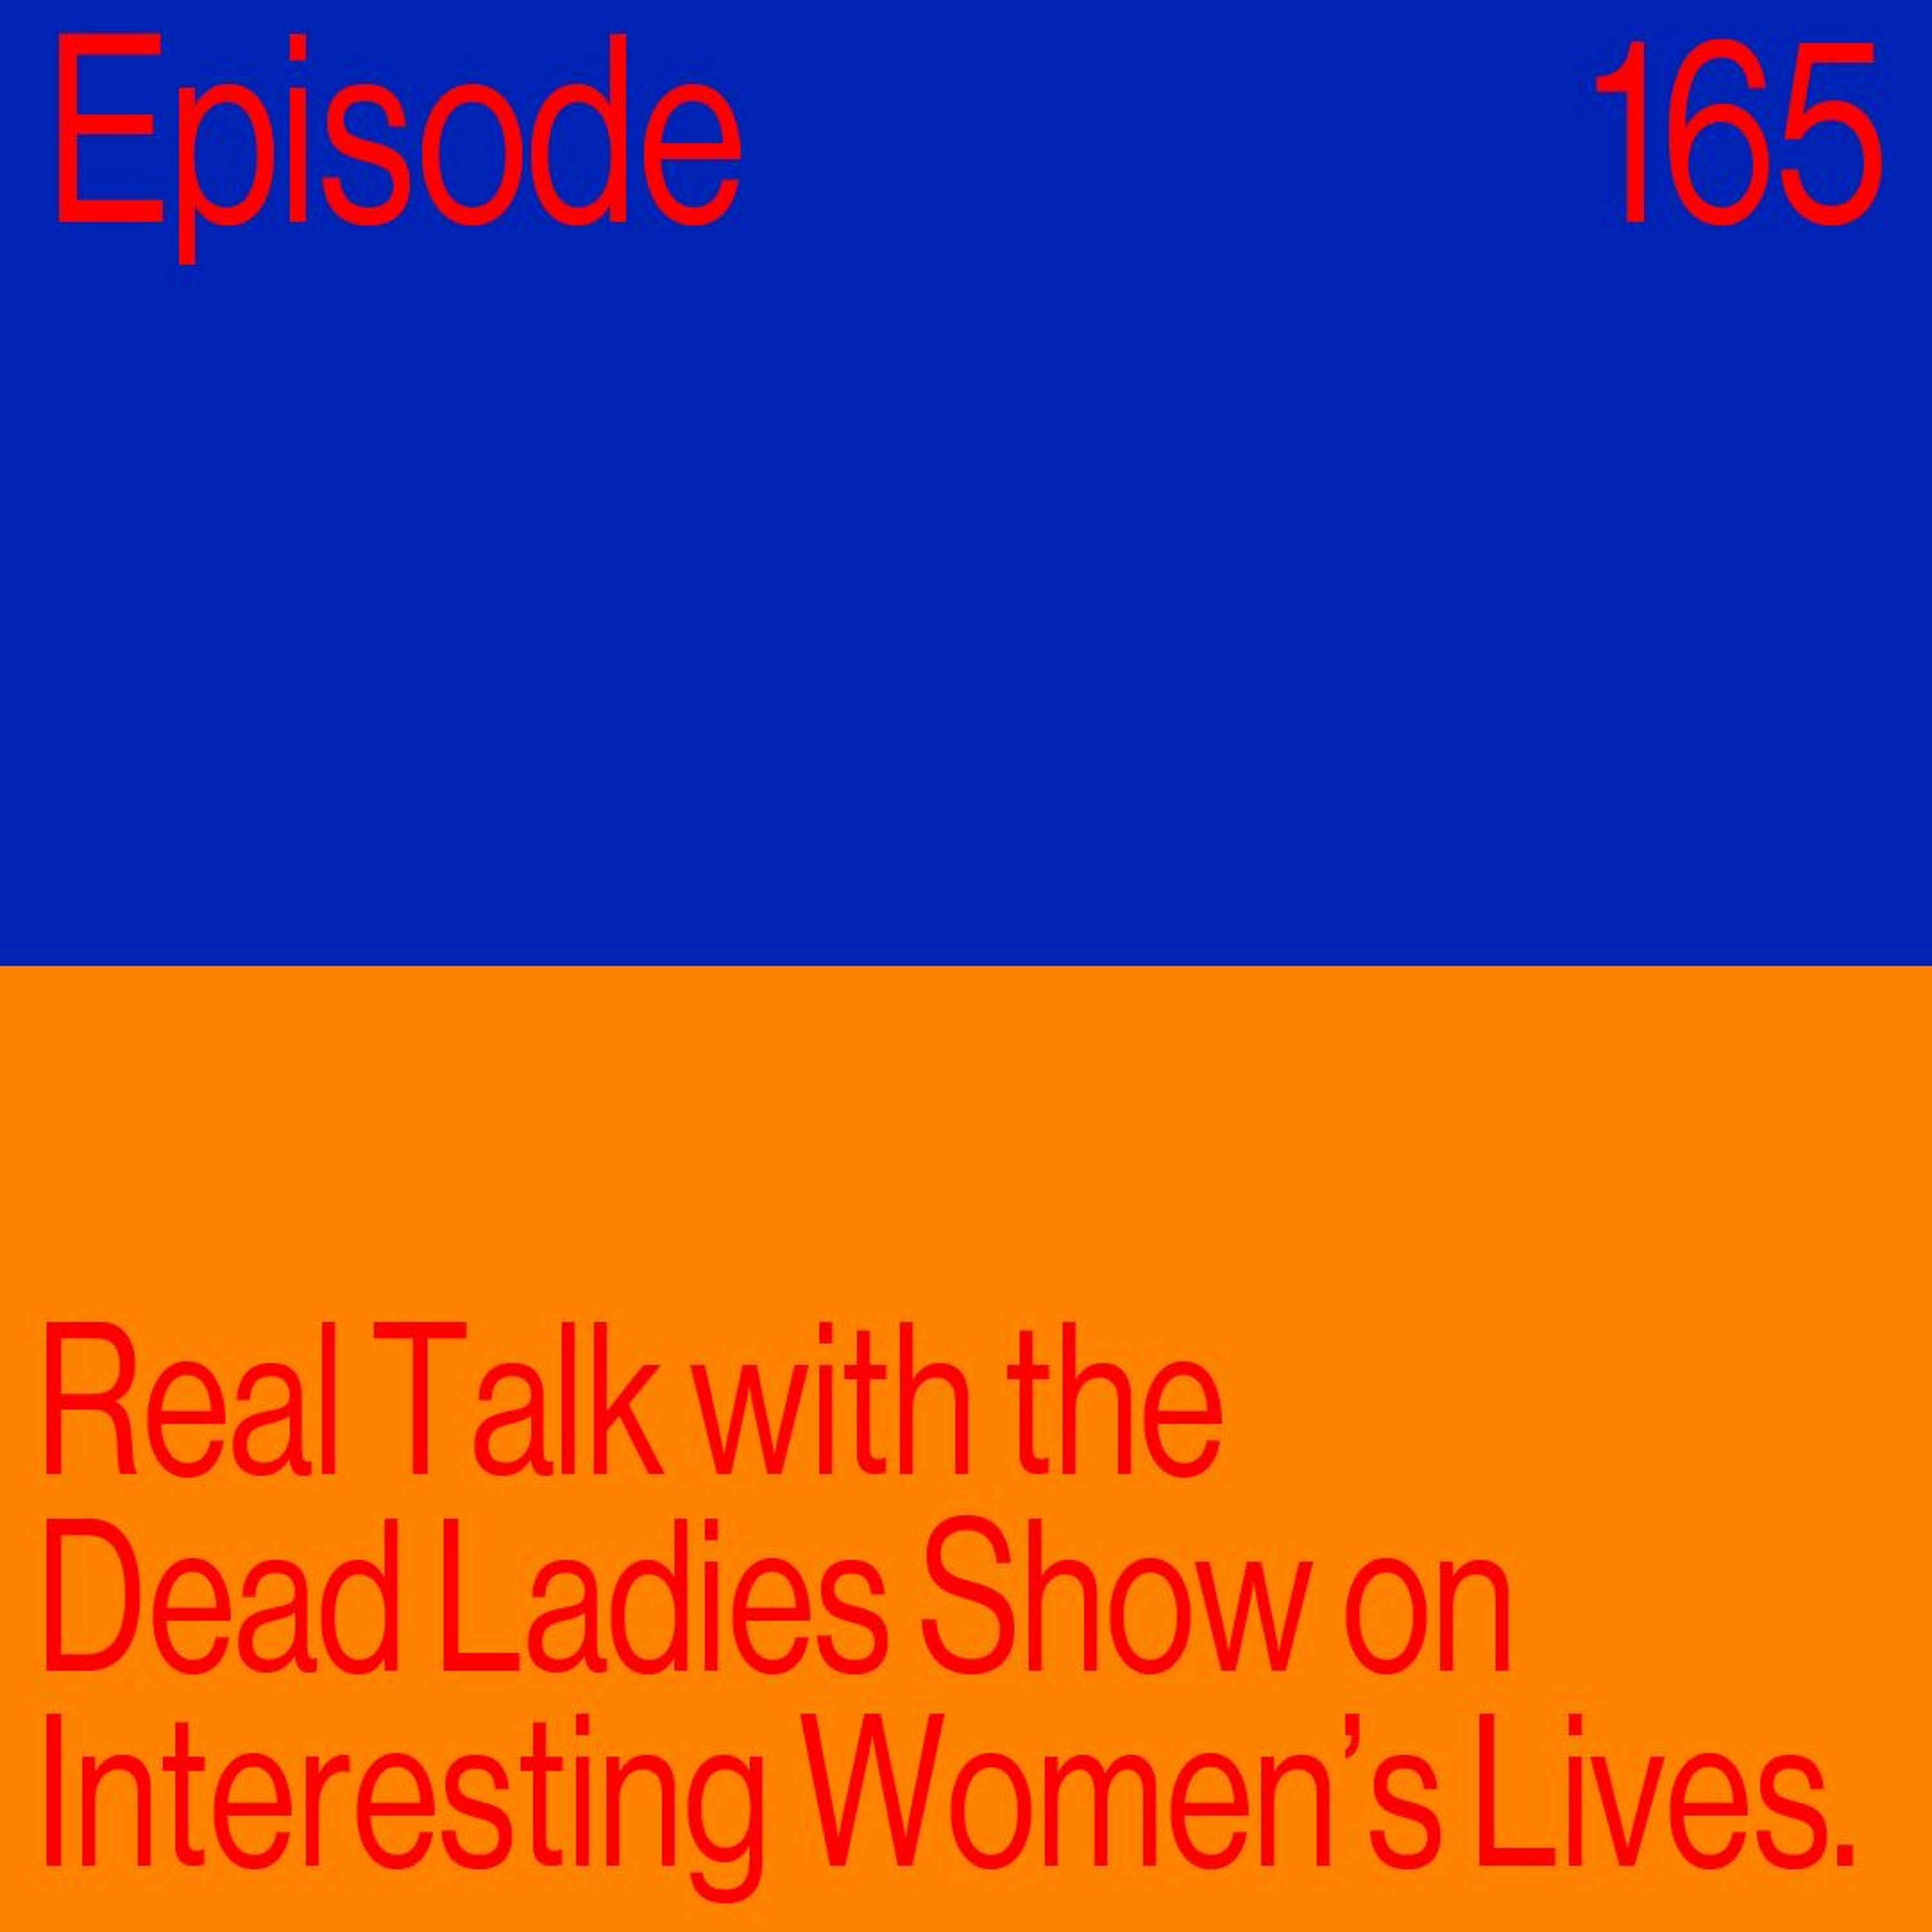 Episode 165: Real Talk with the Dead Ladies Show on Interesting Women's Lives